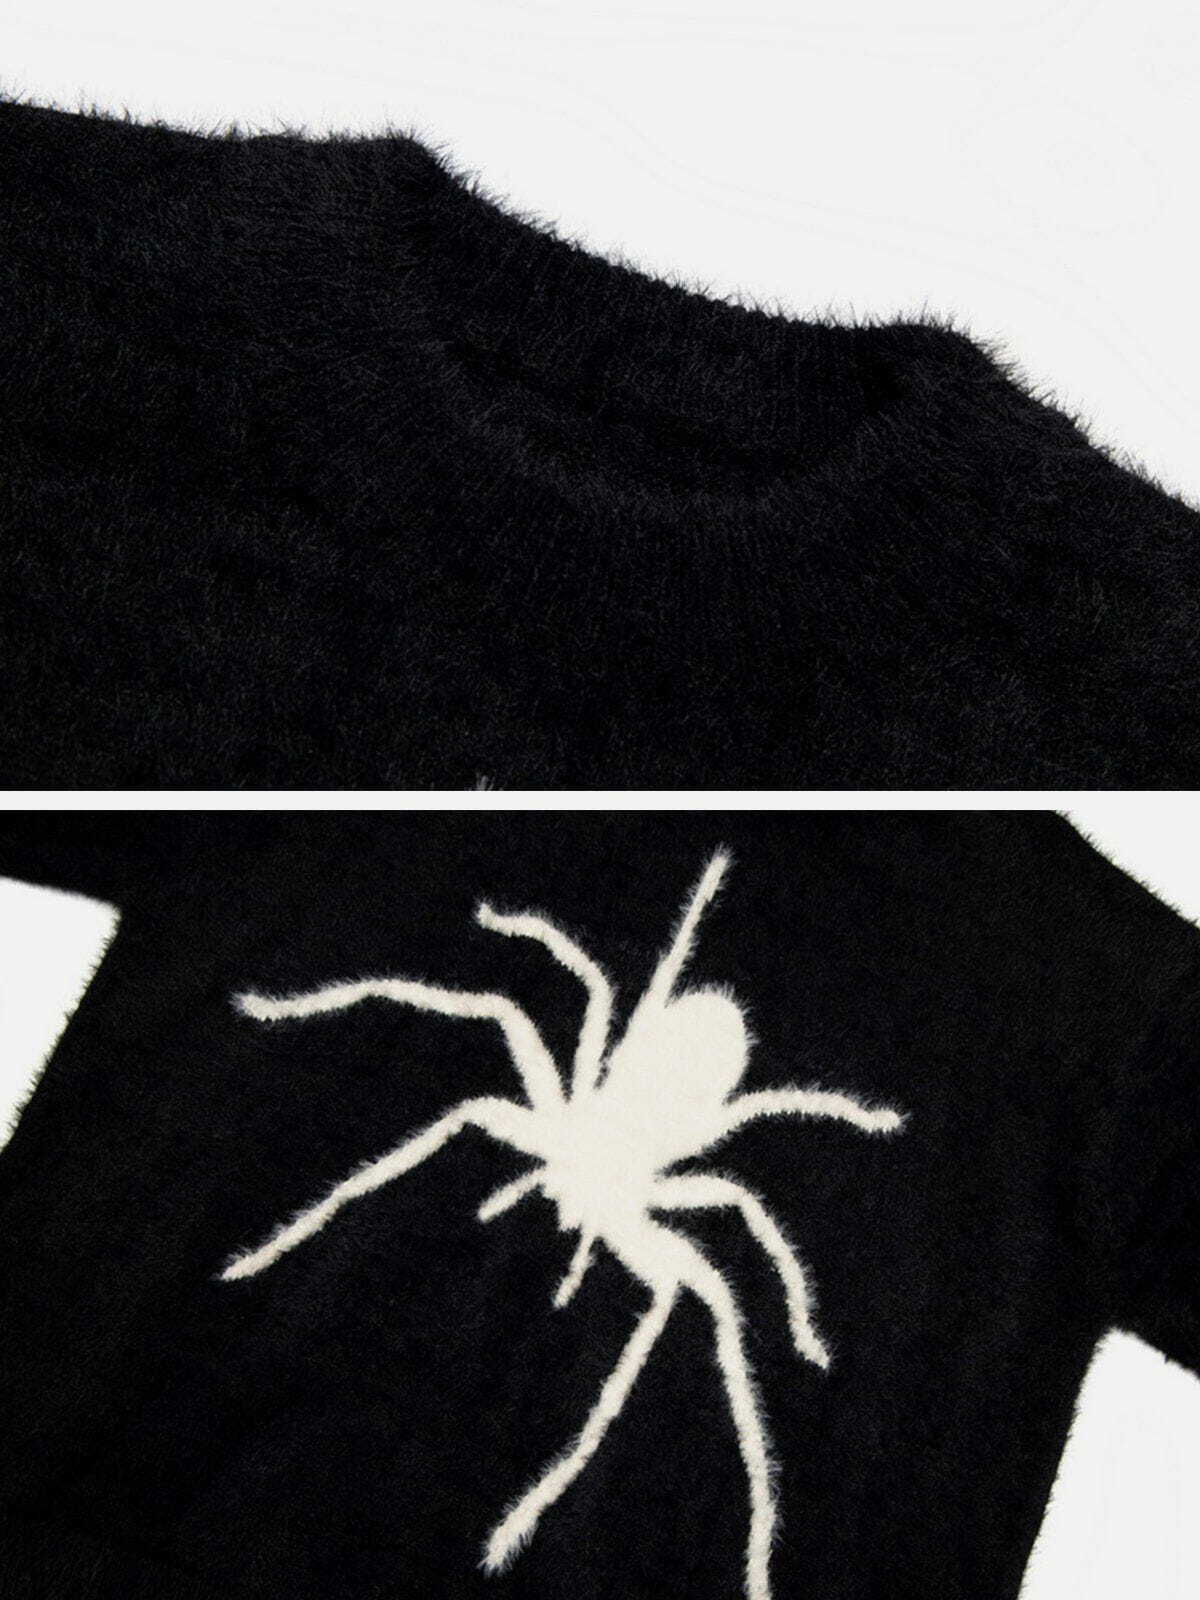 spider knit mohair sweater edgy & vibrant streetwear 8865